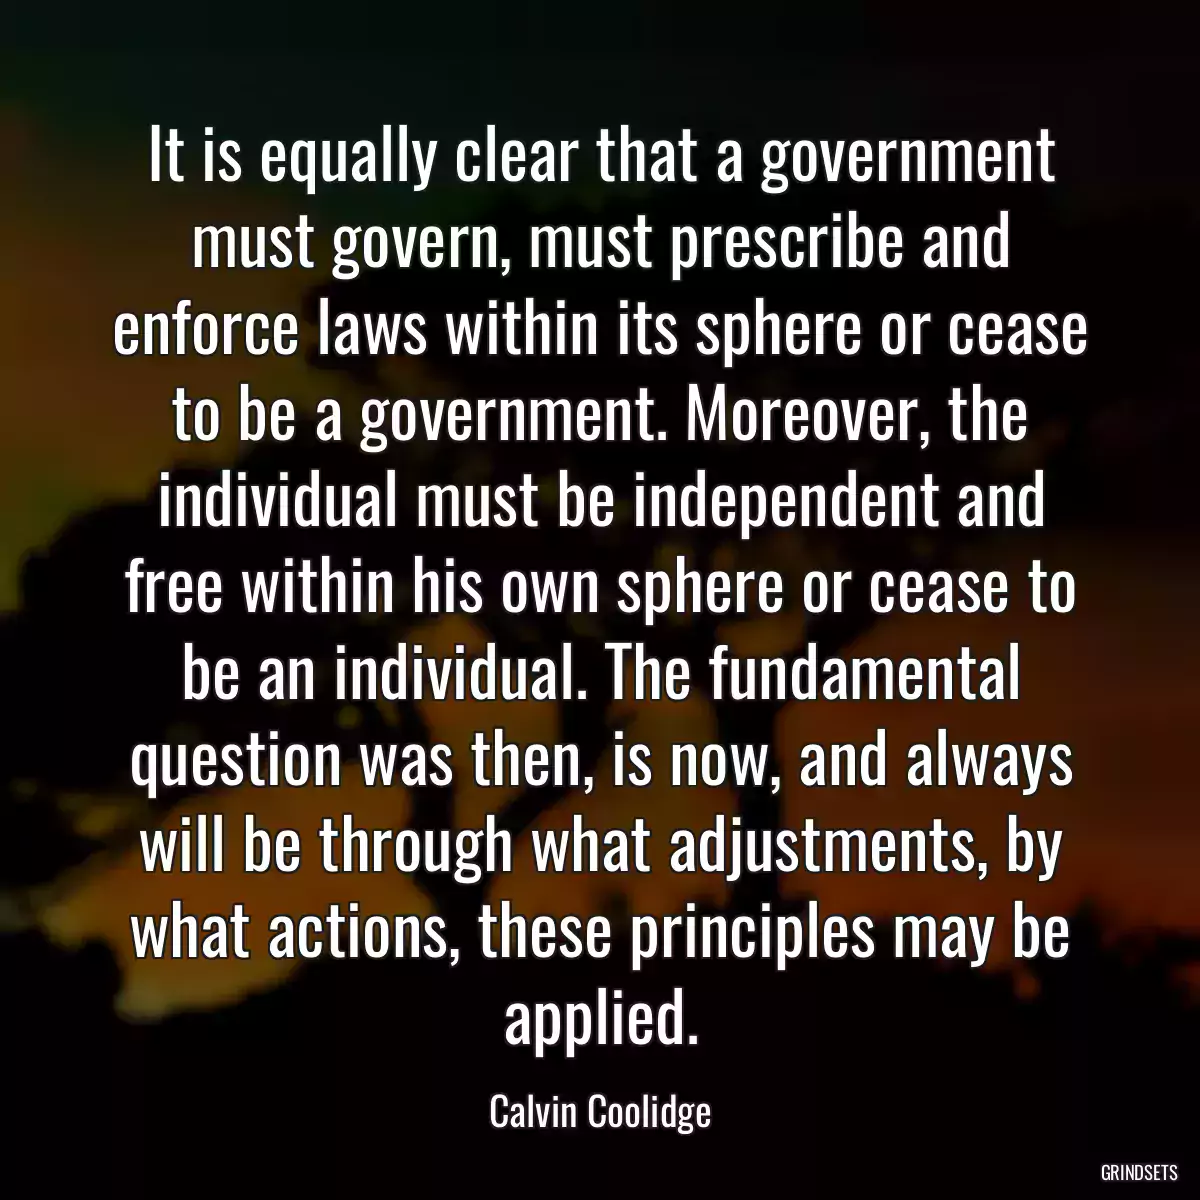 It is equally clear that a government must govern, must prescribe and enforce laws within its sphere or cease to be a government. Moreover, the individual must be independent and free within his own sphere or cease to be an individual. The fundamental question was then, is now, and always will be through what adjustments, by what actions, these principles may be applied.